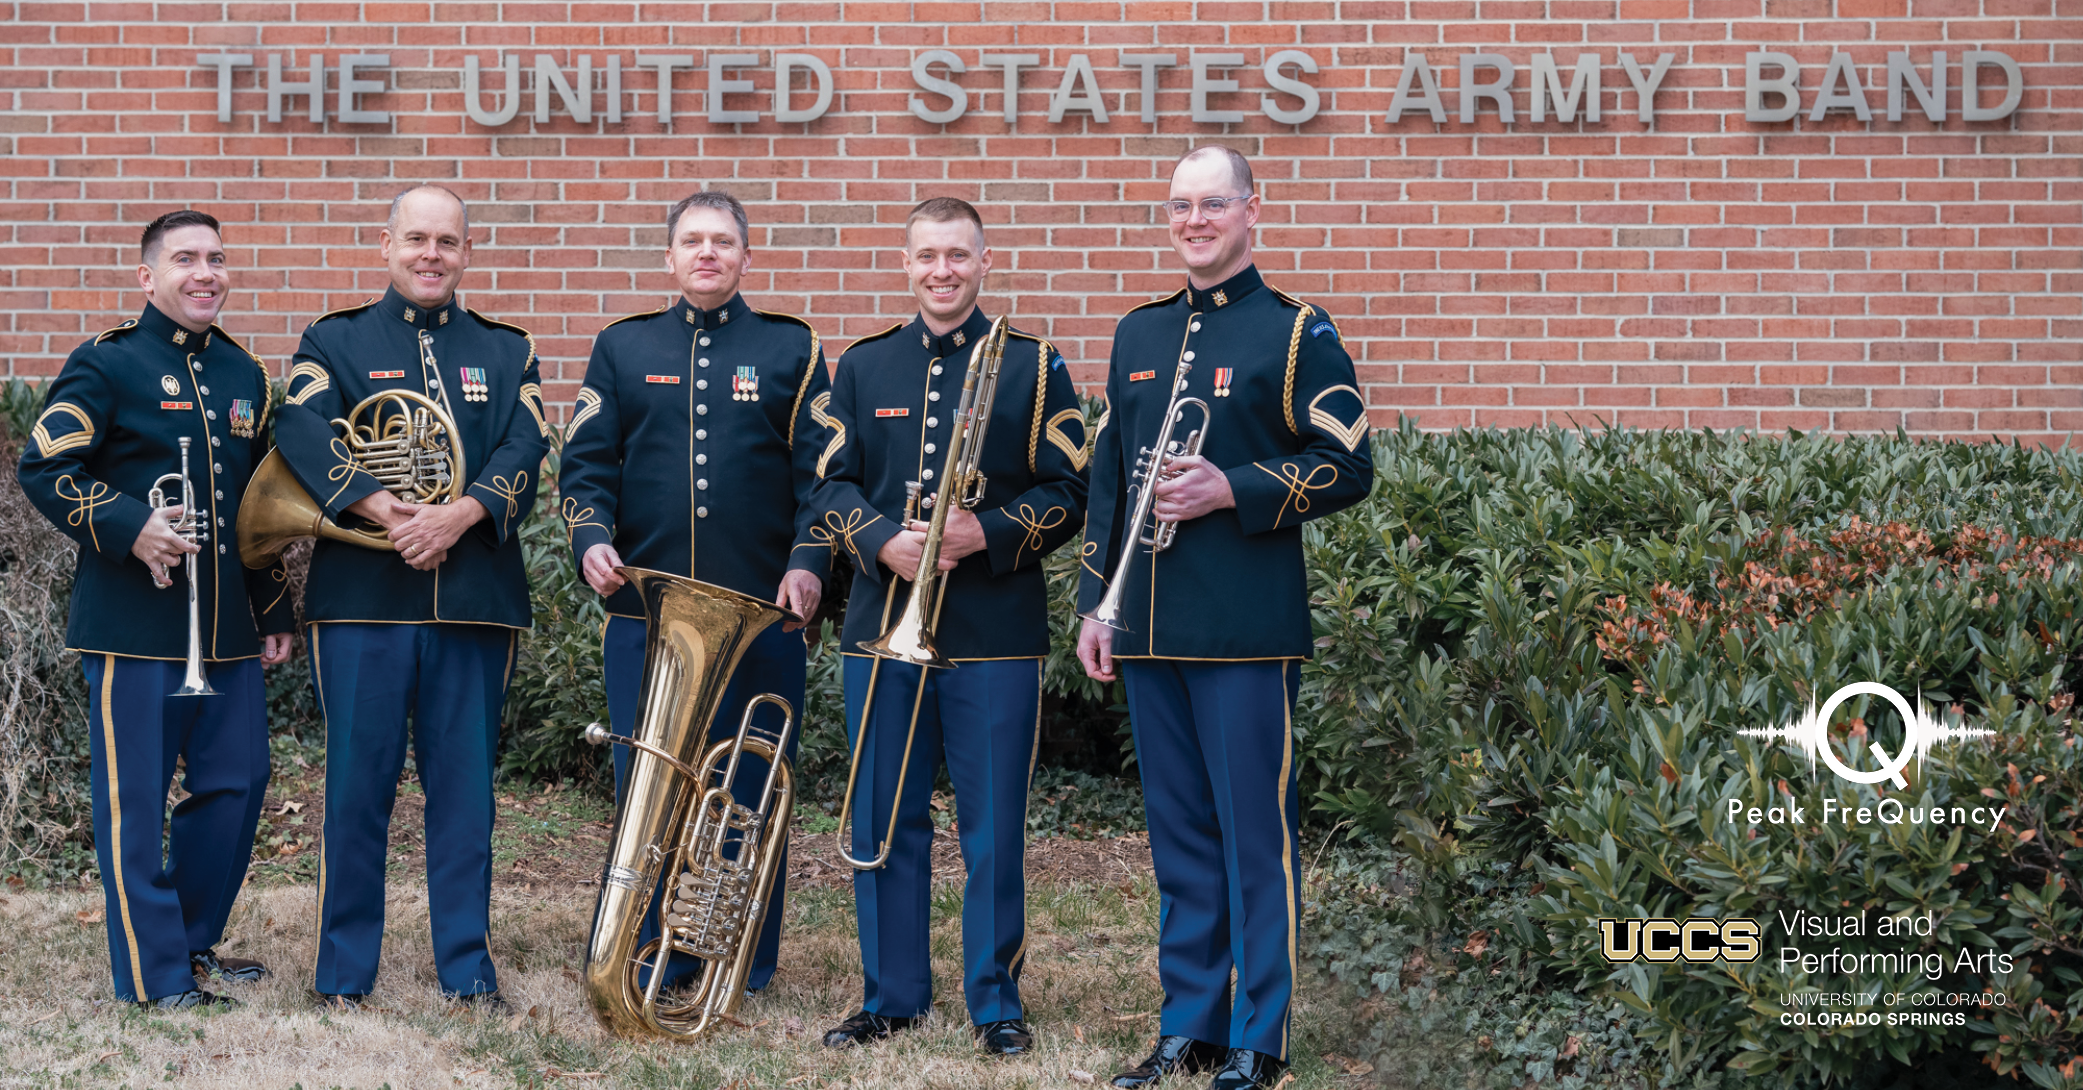 photo of quintet in uniform standig in front of a brick wall with a sign that reads "The United States Army Band"